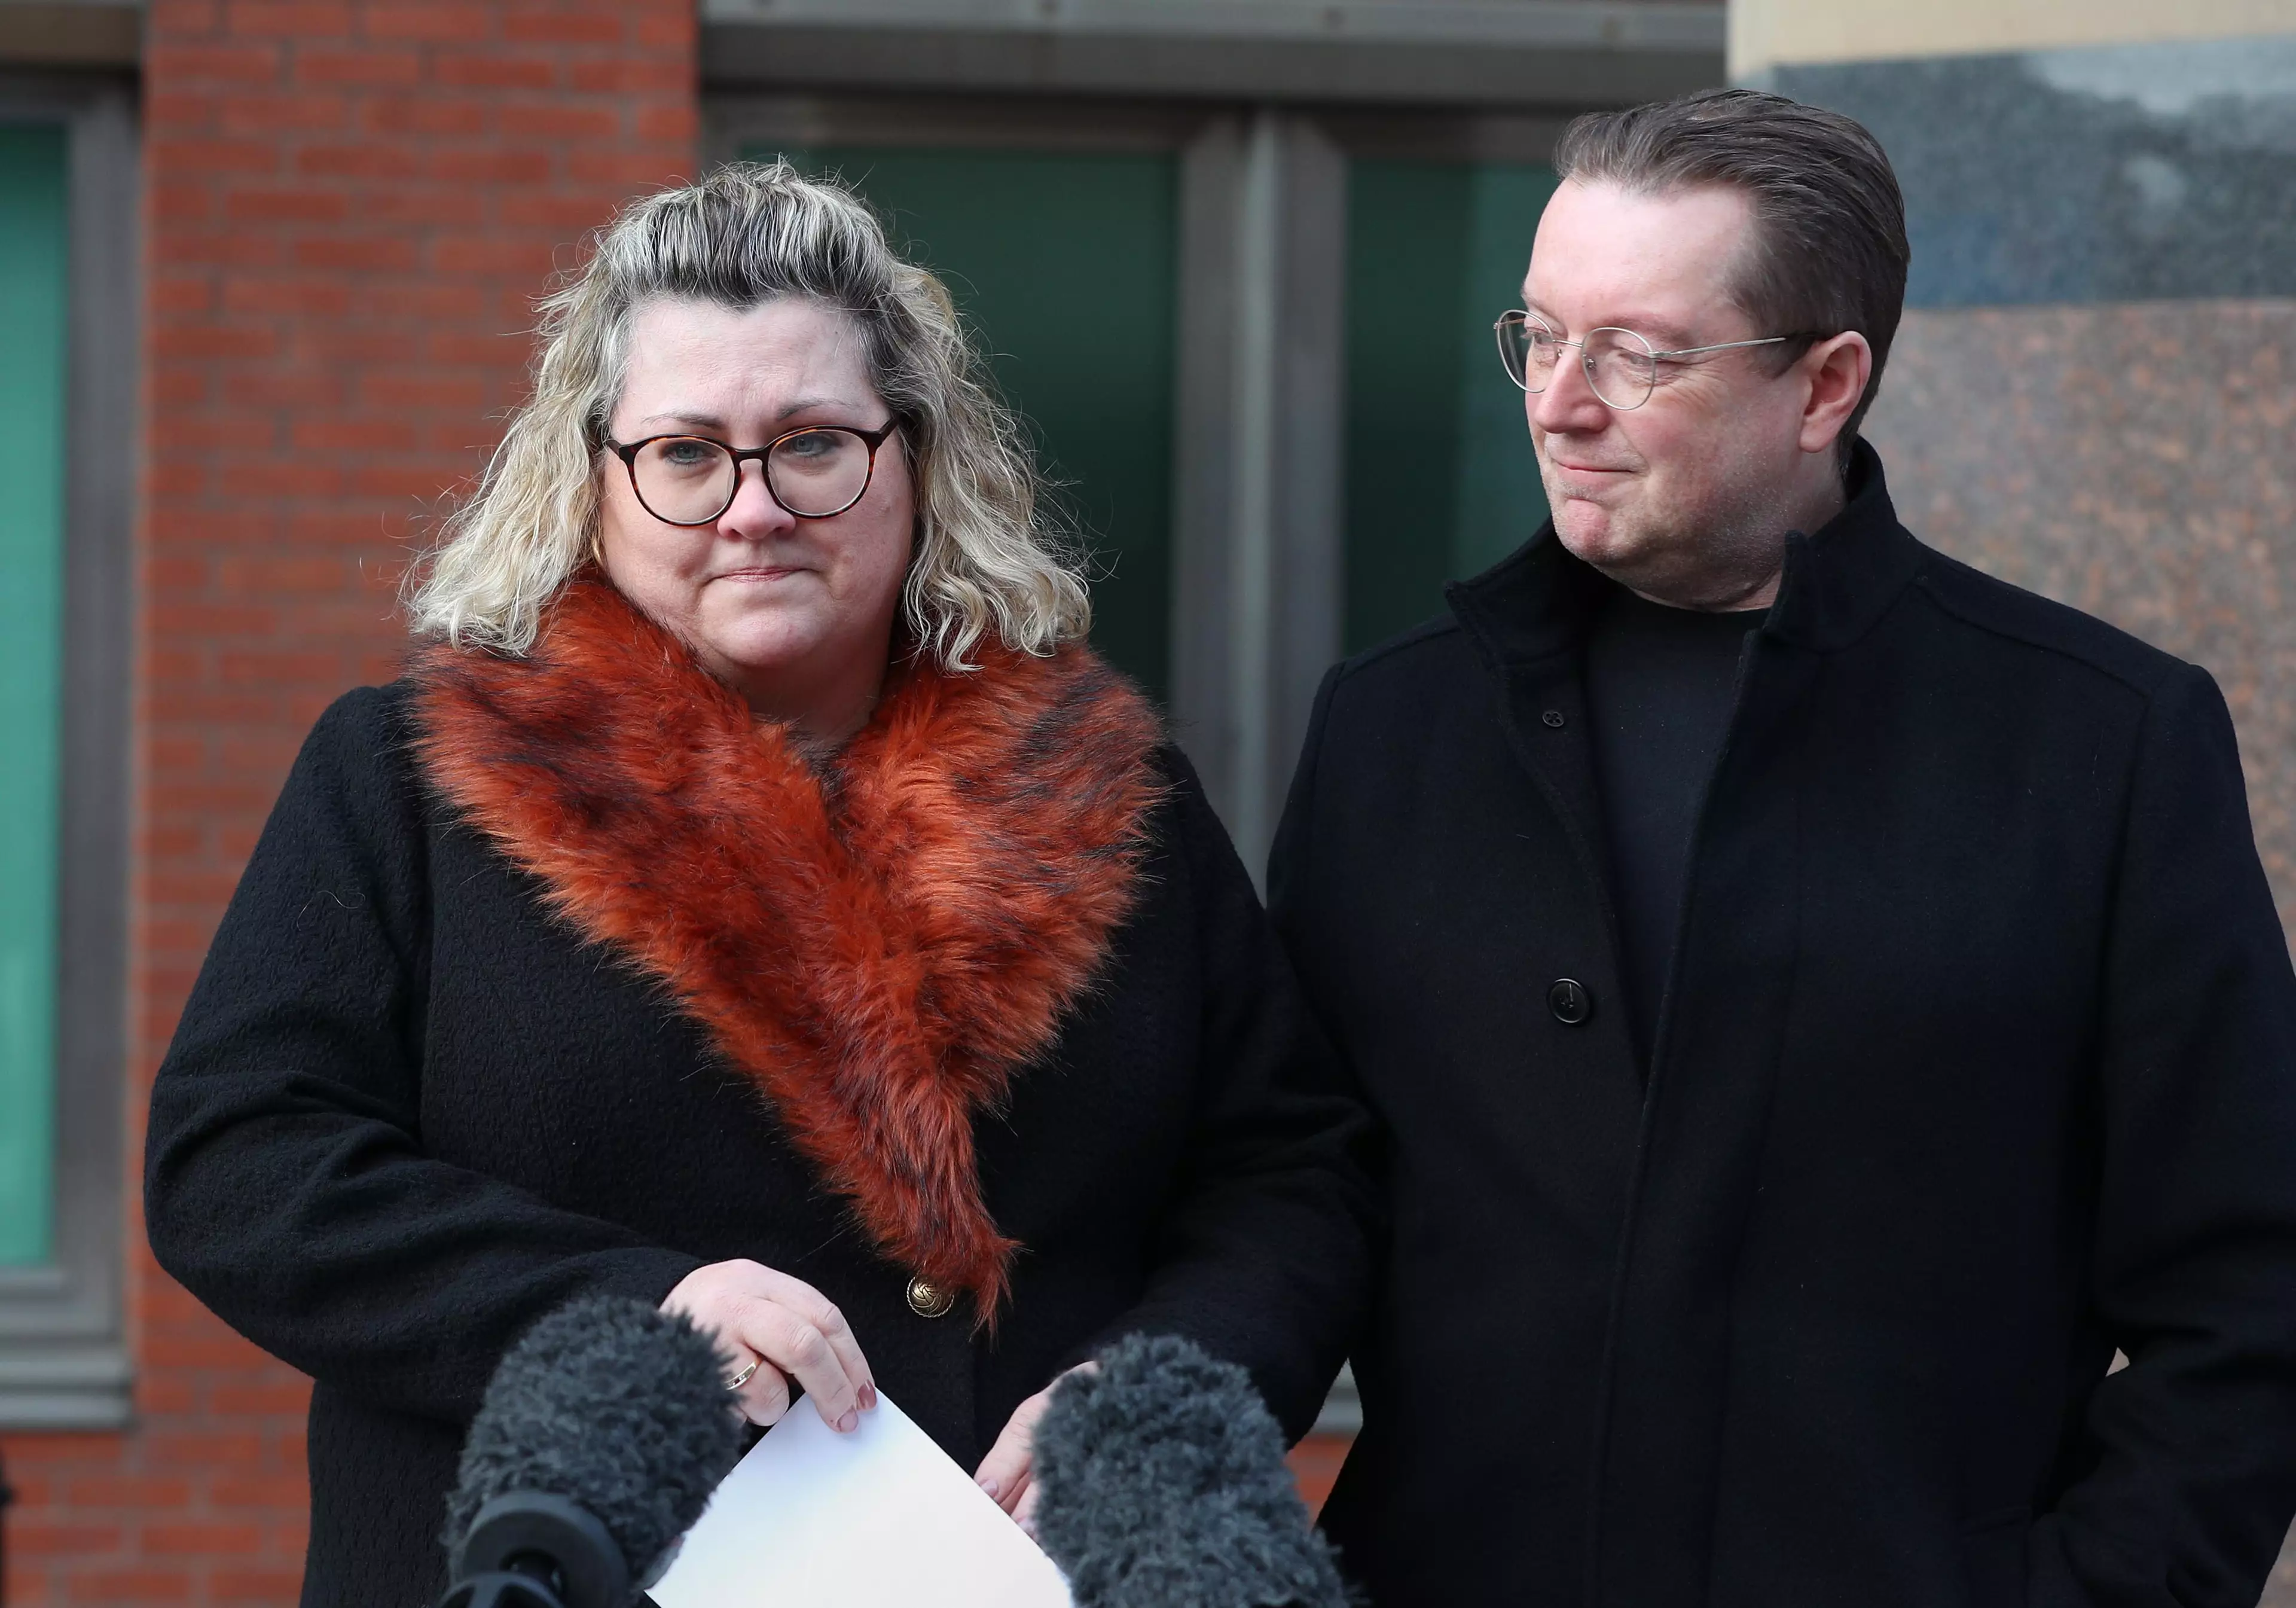 Libby's mum and dad, Lisa and Russ spoke after the verdict (